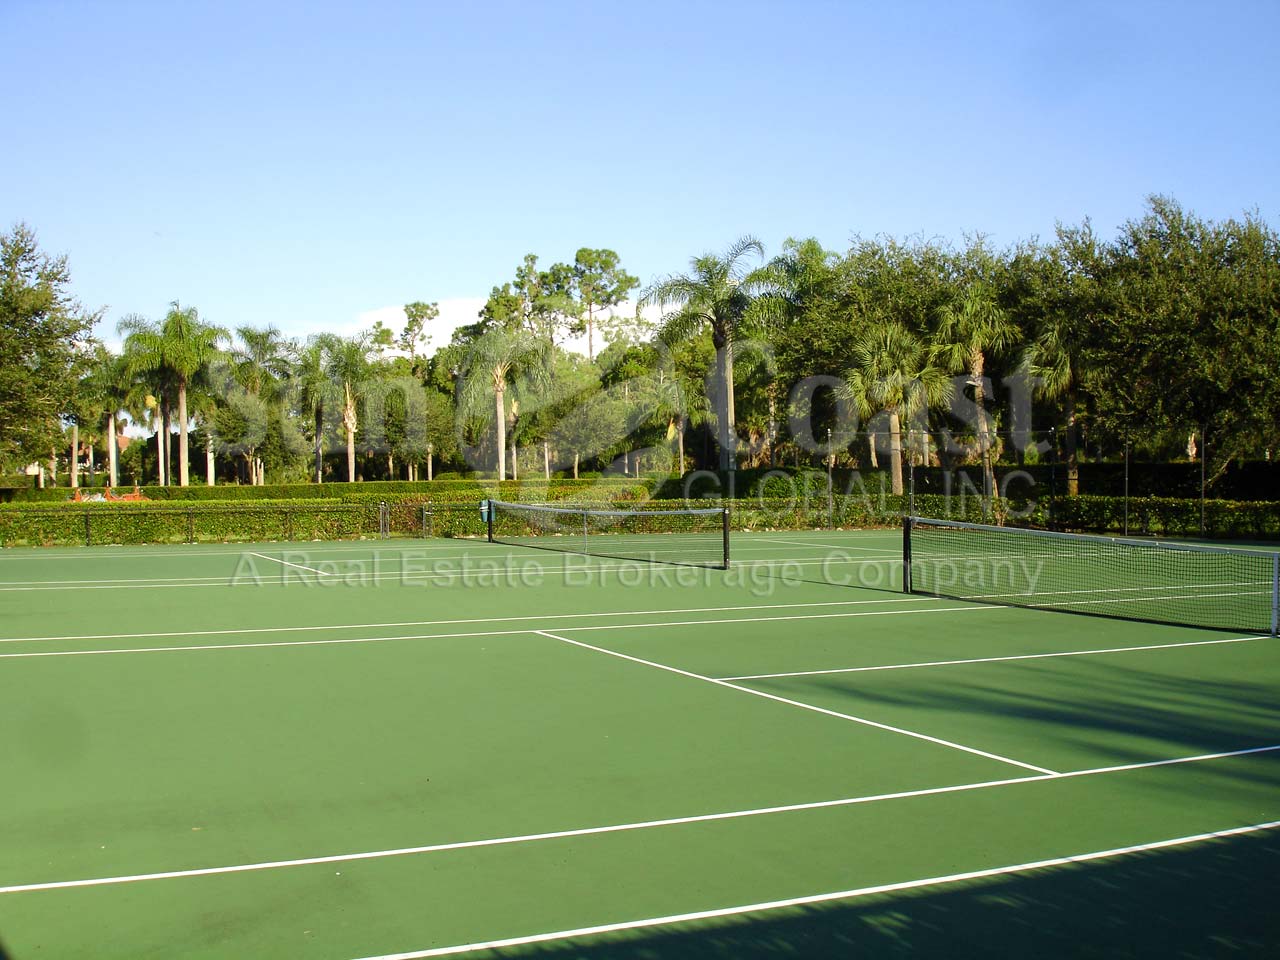 Greenlinks tennis courts